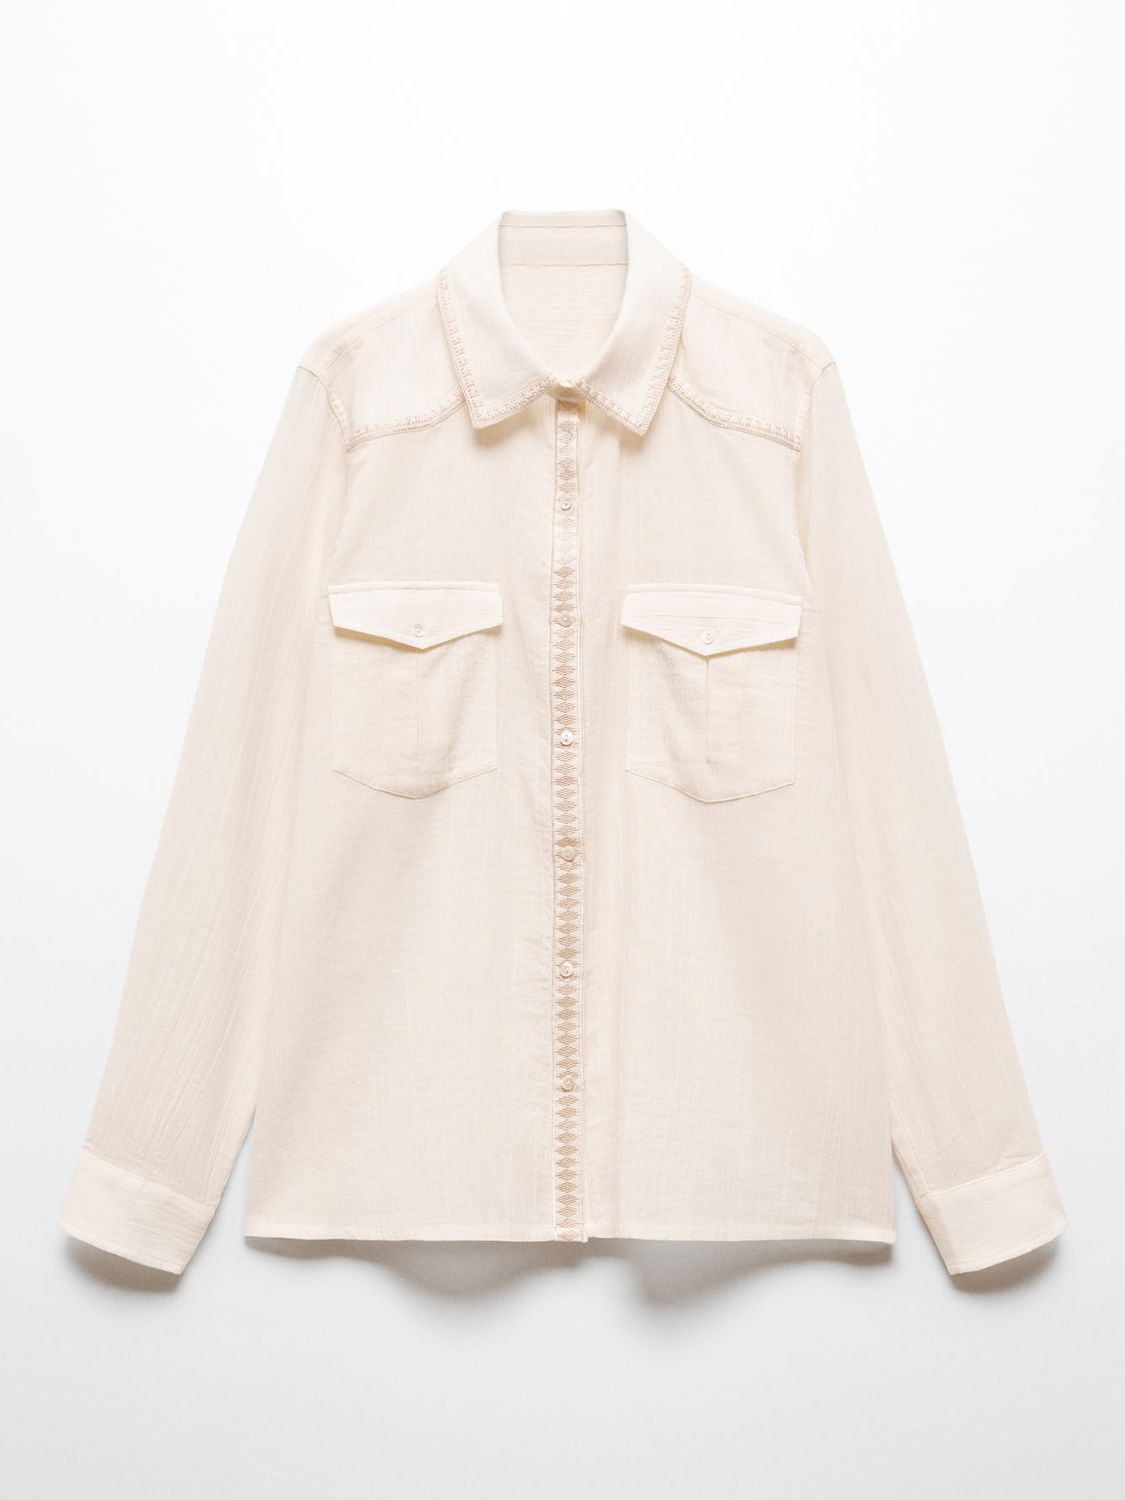 Buy Mango Bonnie Cotton Embroidery Shirt, Natural White Online at johnlewis.com